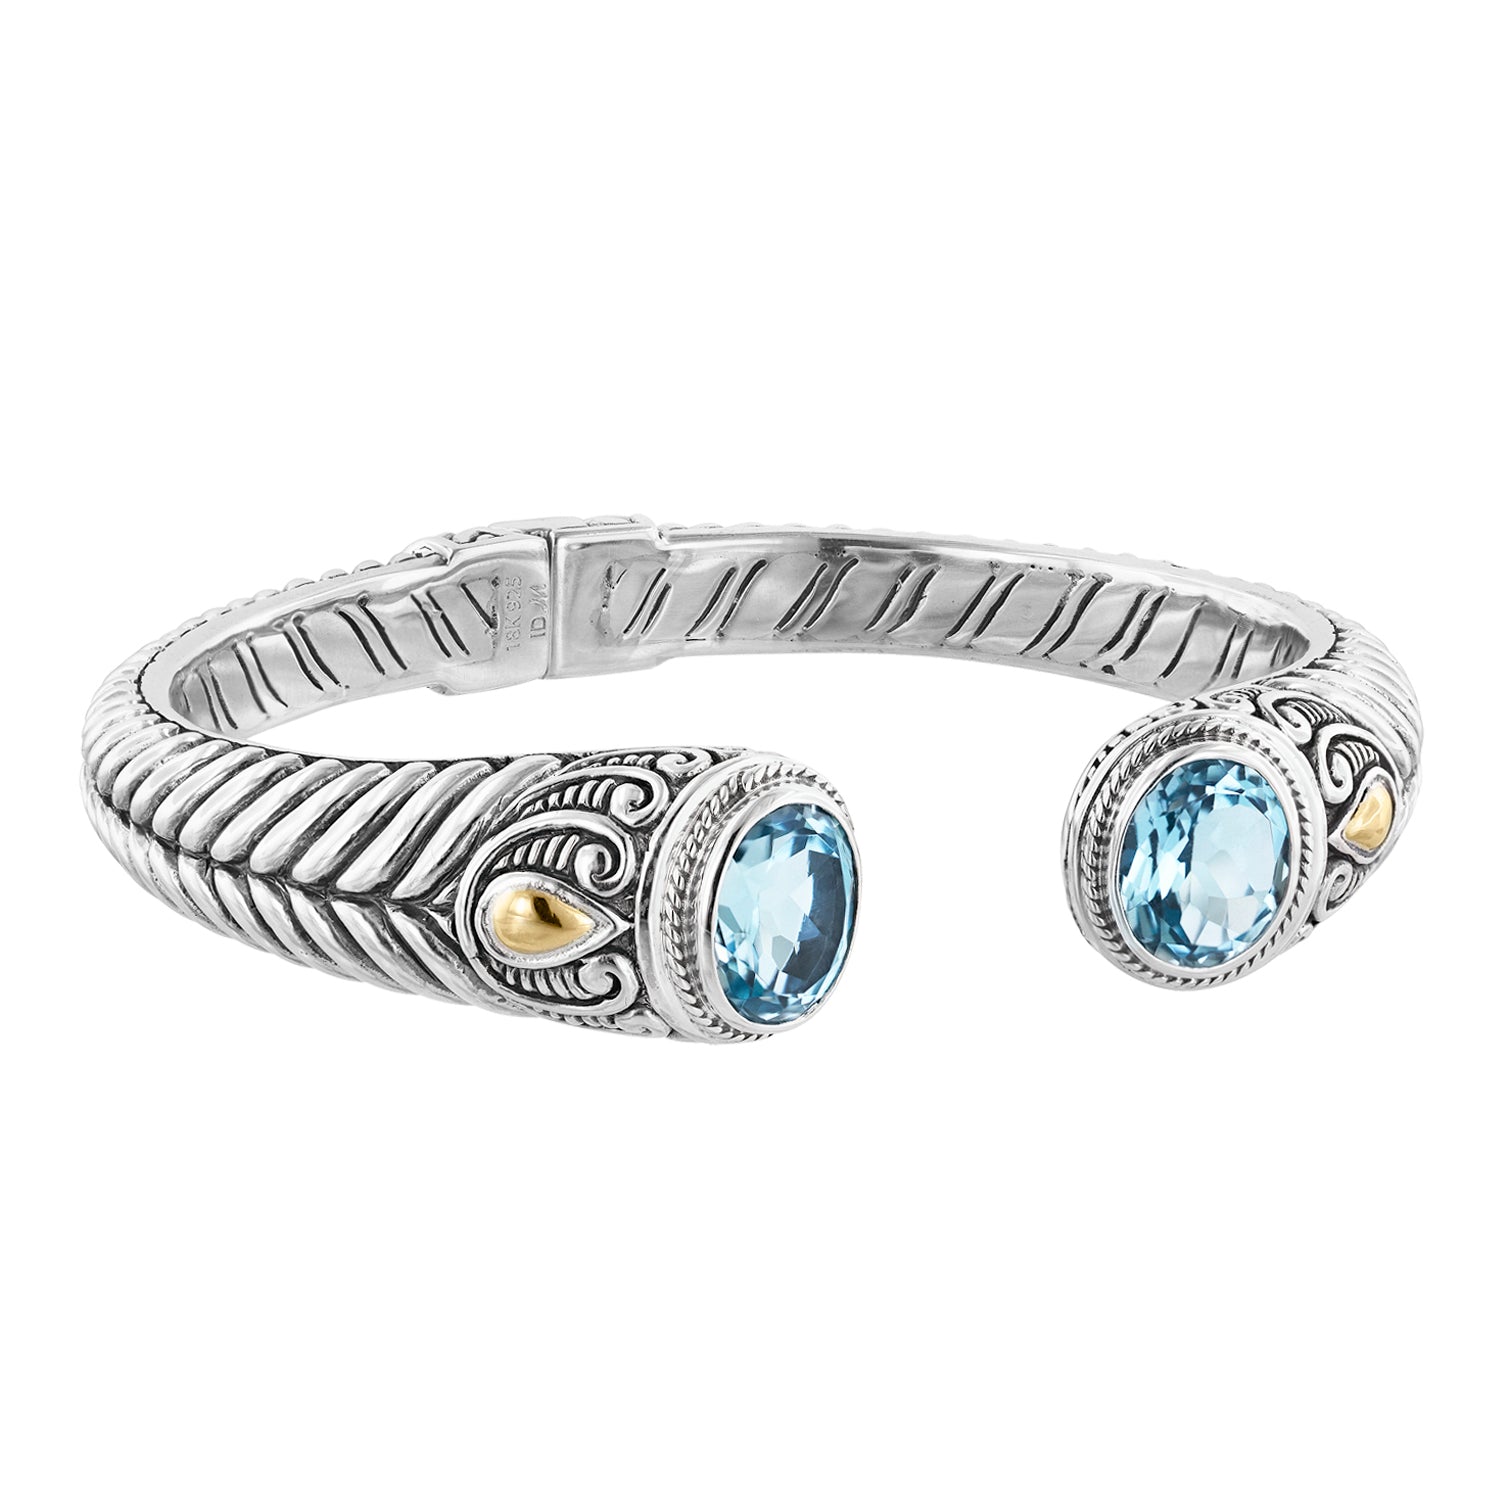 Sterling Silver Bali Herringbone Hinged Cuff Bracelet with Sky Blue Topaz and 18K Gold Accents